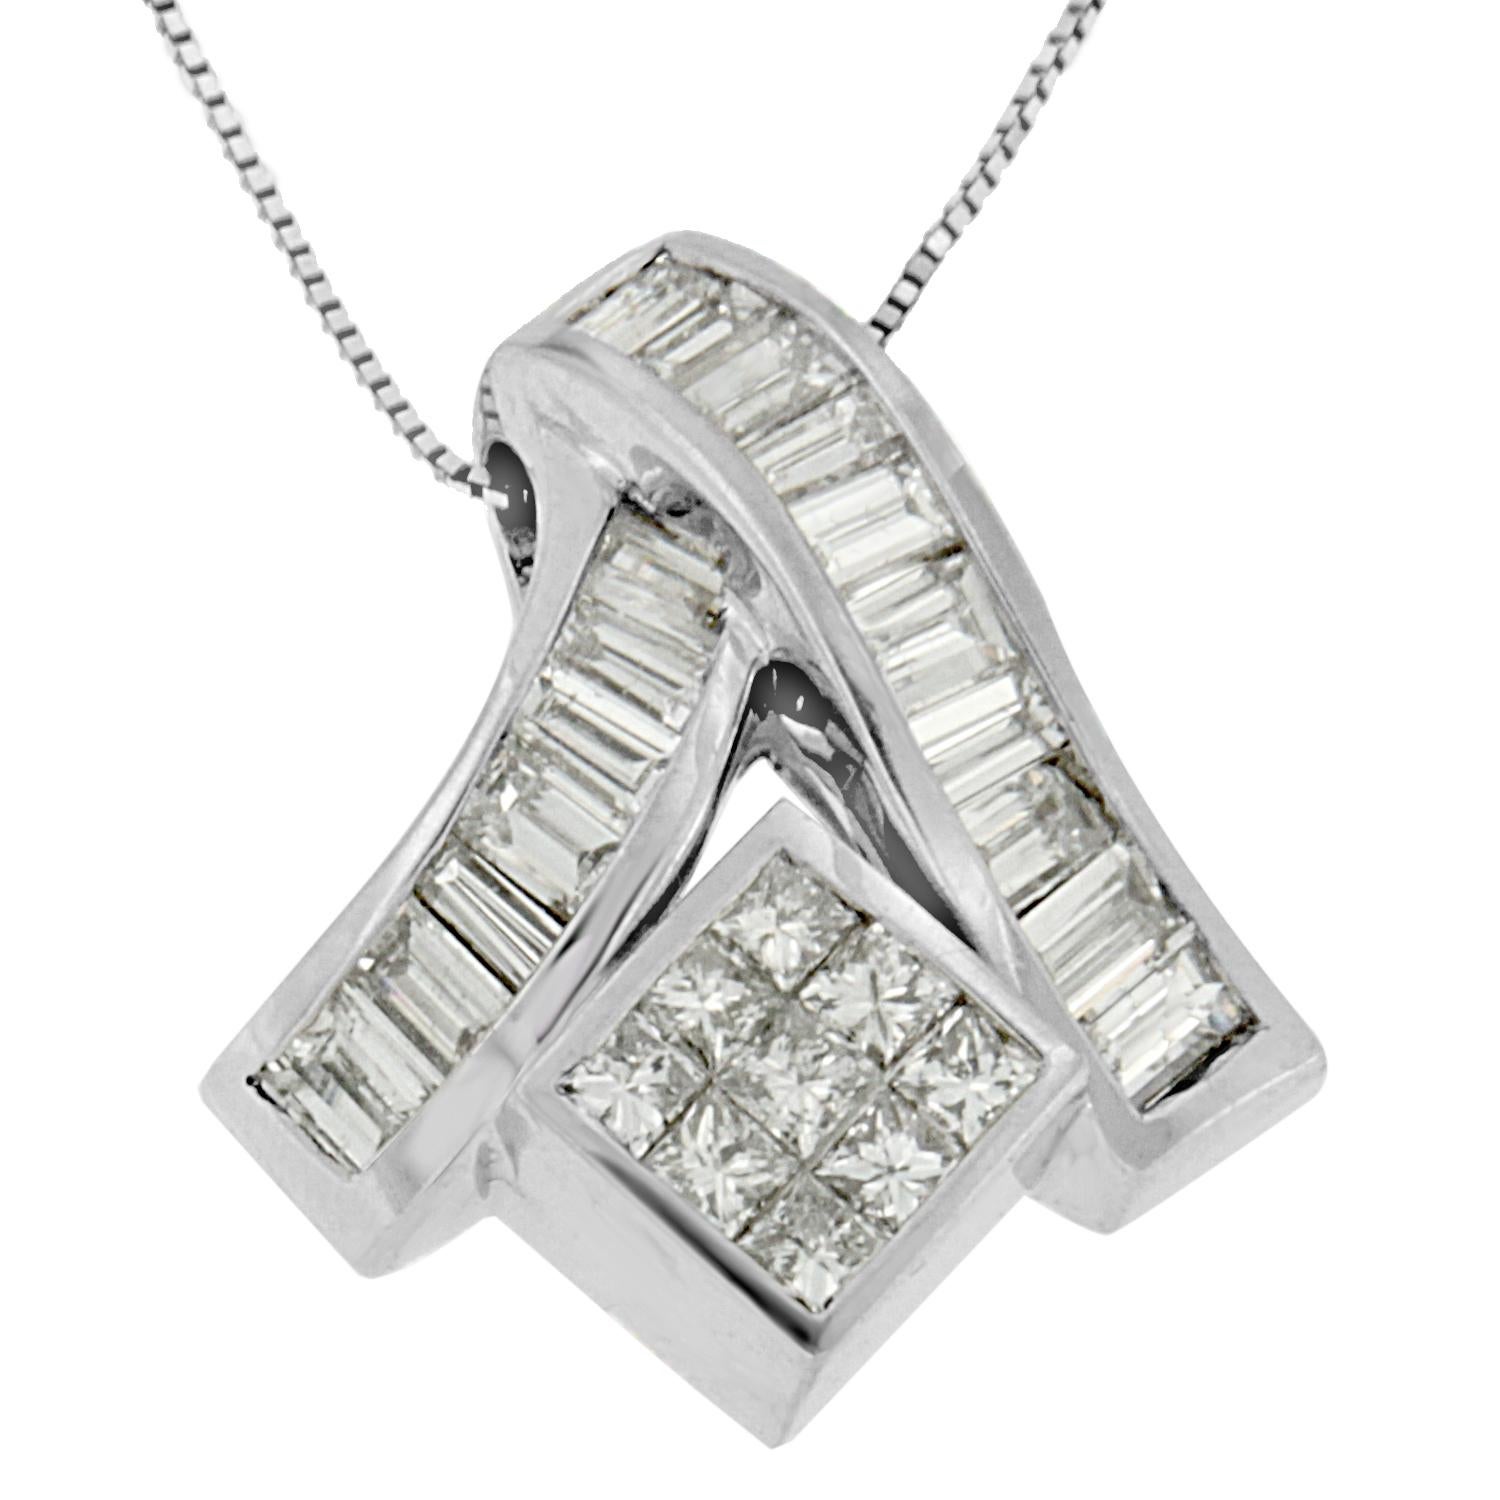 Subtle enough for daily wear but elegant enough for a night at the opera, this stunning 14k white gold pendant appears to defy gravity. A central square of 9 princess cut diamonds is held in place by two overlapping streamers of channel set diamond